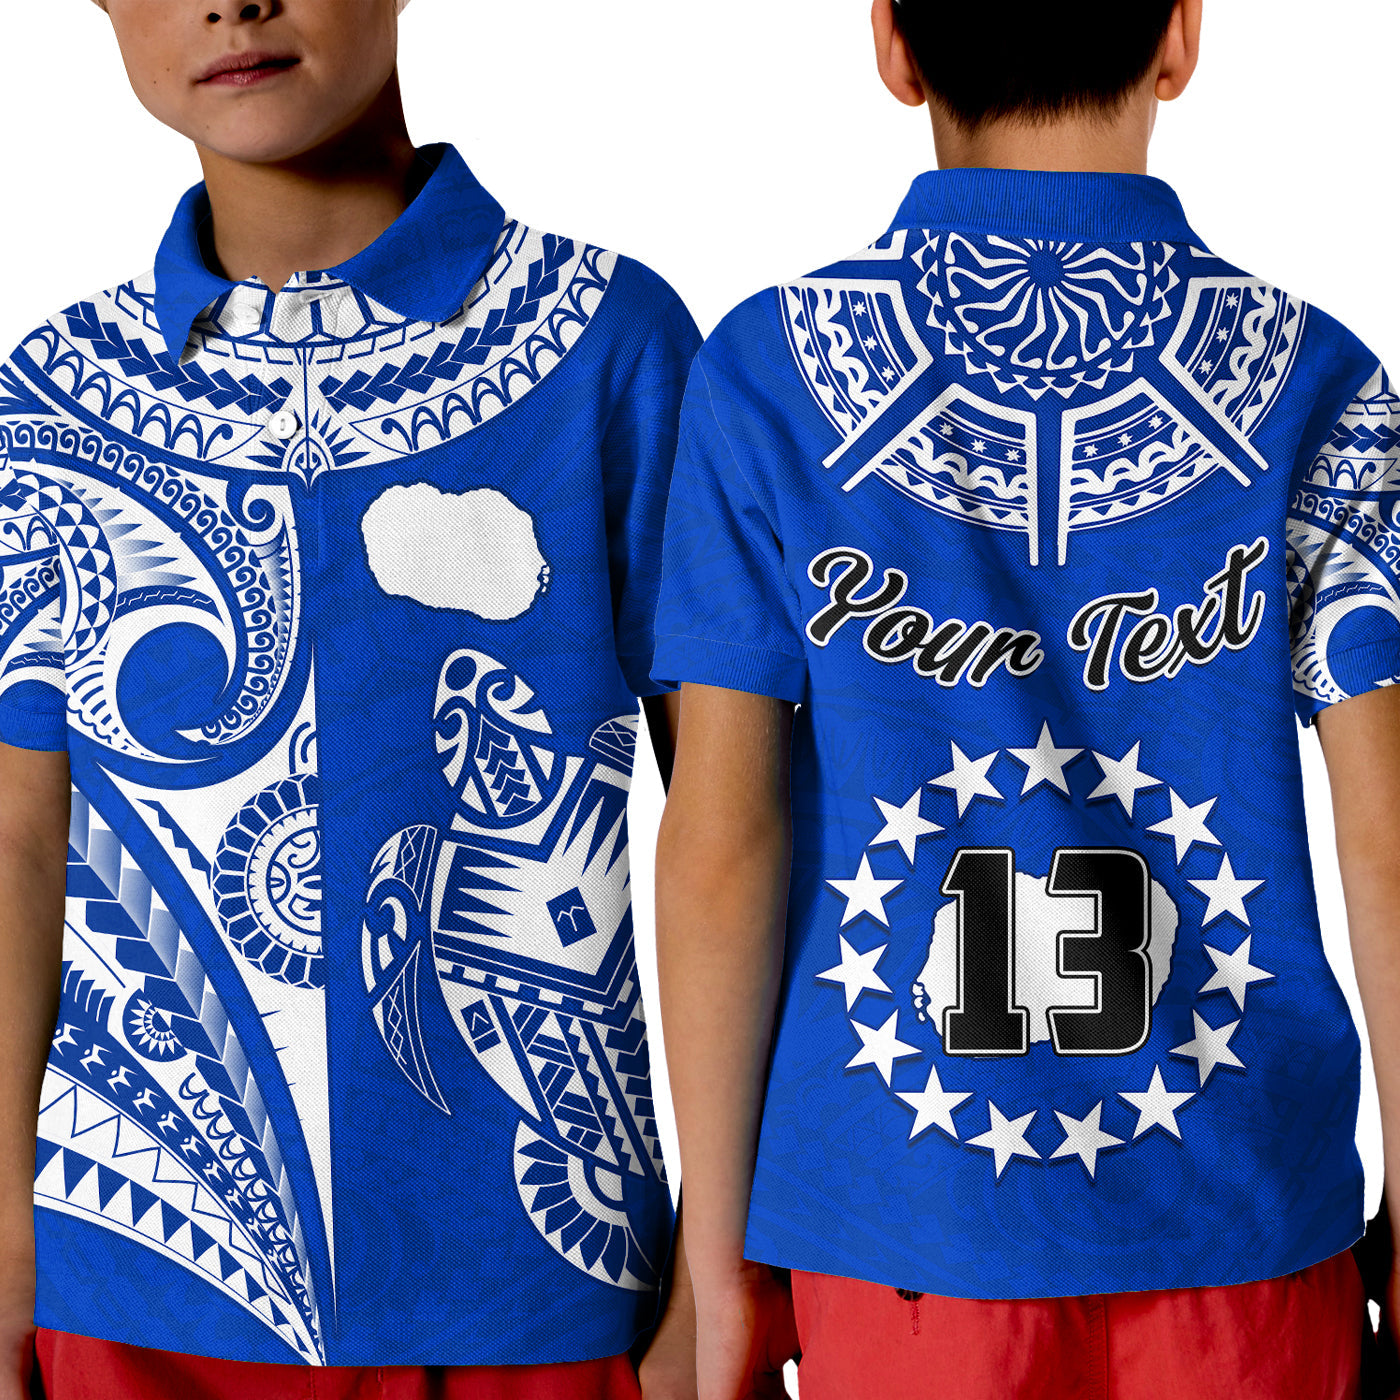 custom-text-and-number-rarotonga-cook-islands-polo-shirt-kid-turtle-and-map-style-blue